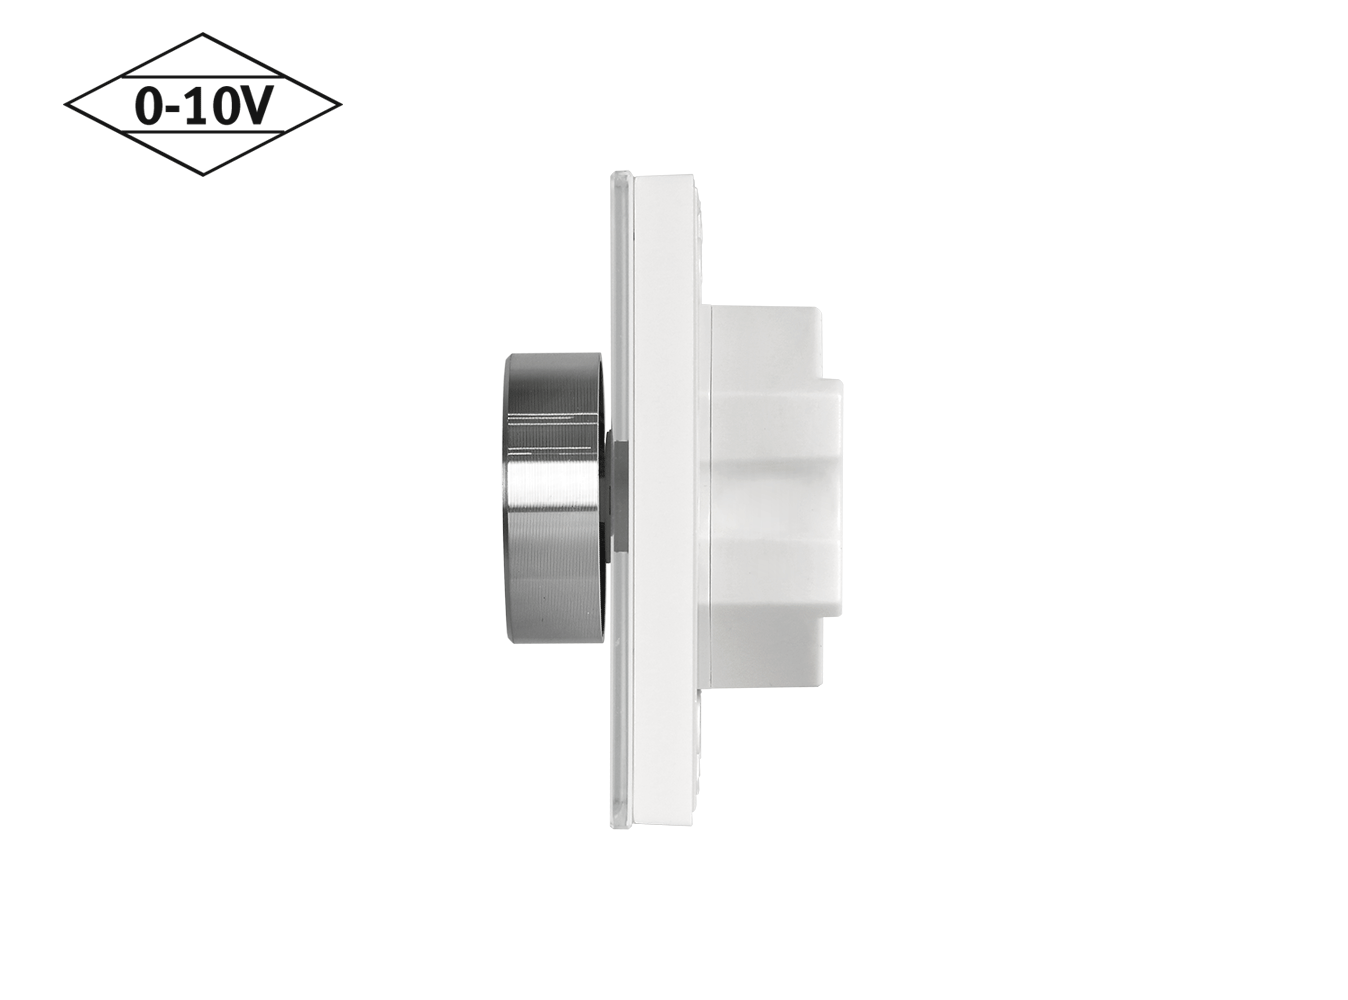 Mounted 0-10V Wall Dimmer Side View